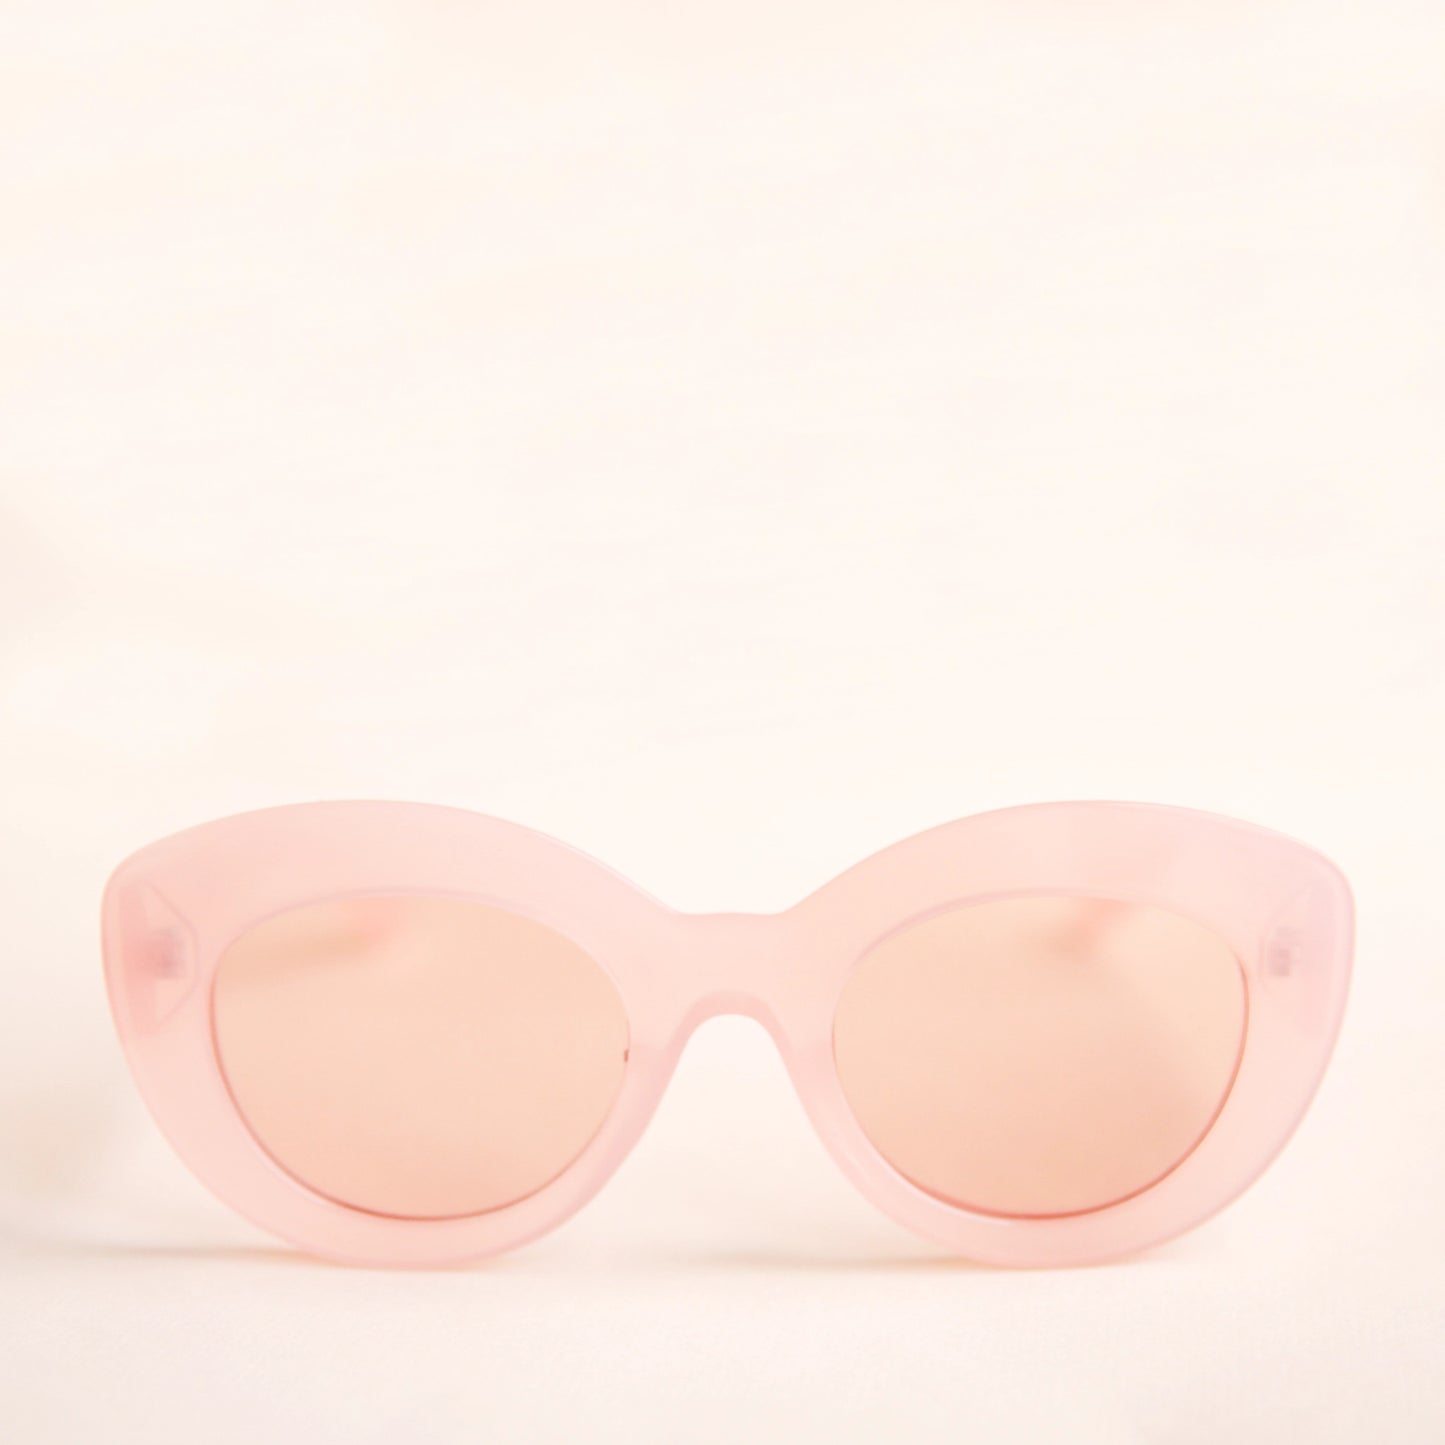 On a neutral background is the Gemma Sunglasses in a light pink shade. They have a rounded shape with a slight cateye flair at the corners. The frame material is a durable plastic and the lenses are a similar tone.